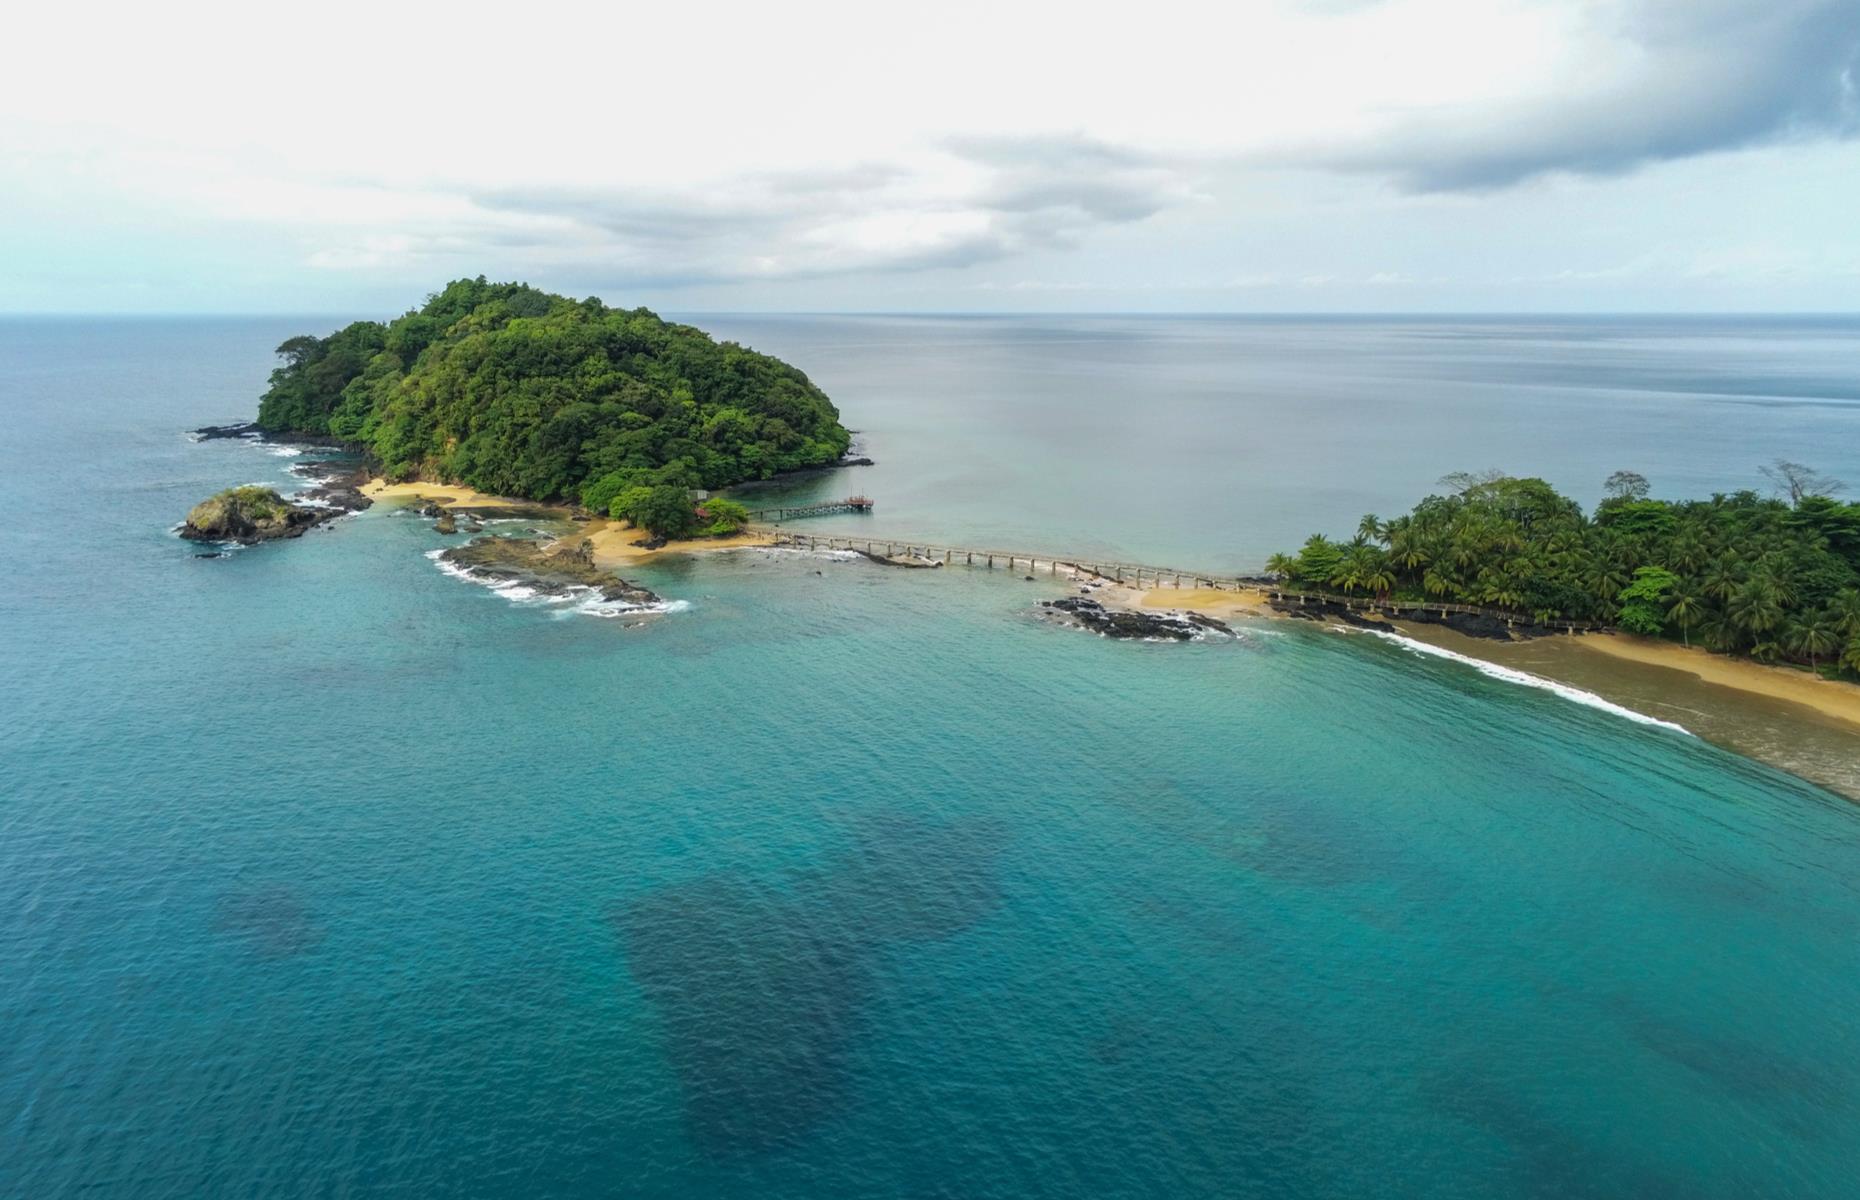 <p>The two-island nation of Sao Tomé and Principe is Africa’s second-smallest country and has visitor numbers matching its size: <a href="https://www.worlddata.info/africa/sao-tome-and-principe/tourism.php">just 33,400 in 2018</a>. Placed in the context of population size, that still leaves it in 138th place when it comes to global tourism figures. Part of the reason is the requirement for visas before traveling, though there are usually direct flights from Portugal, from which the country gained independence in 1975.</p>